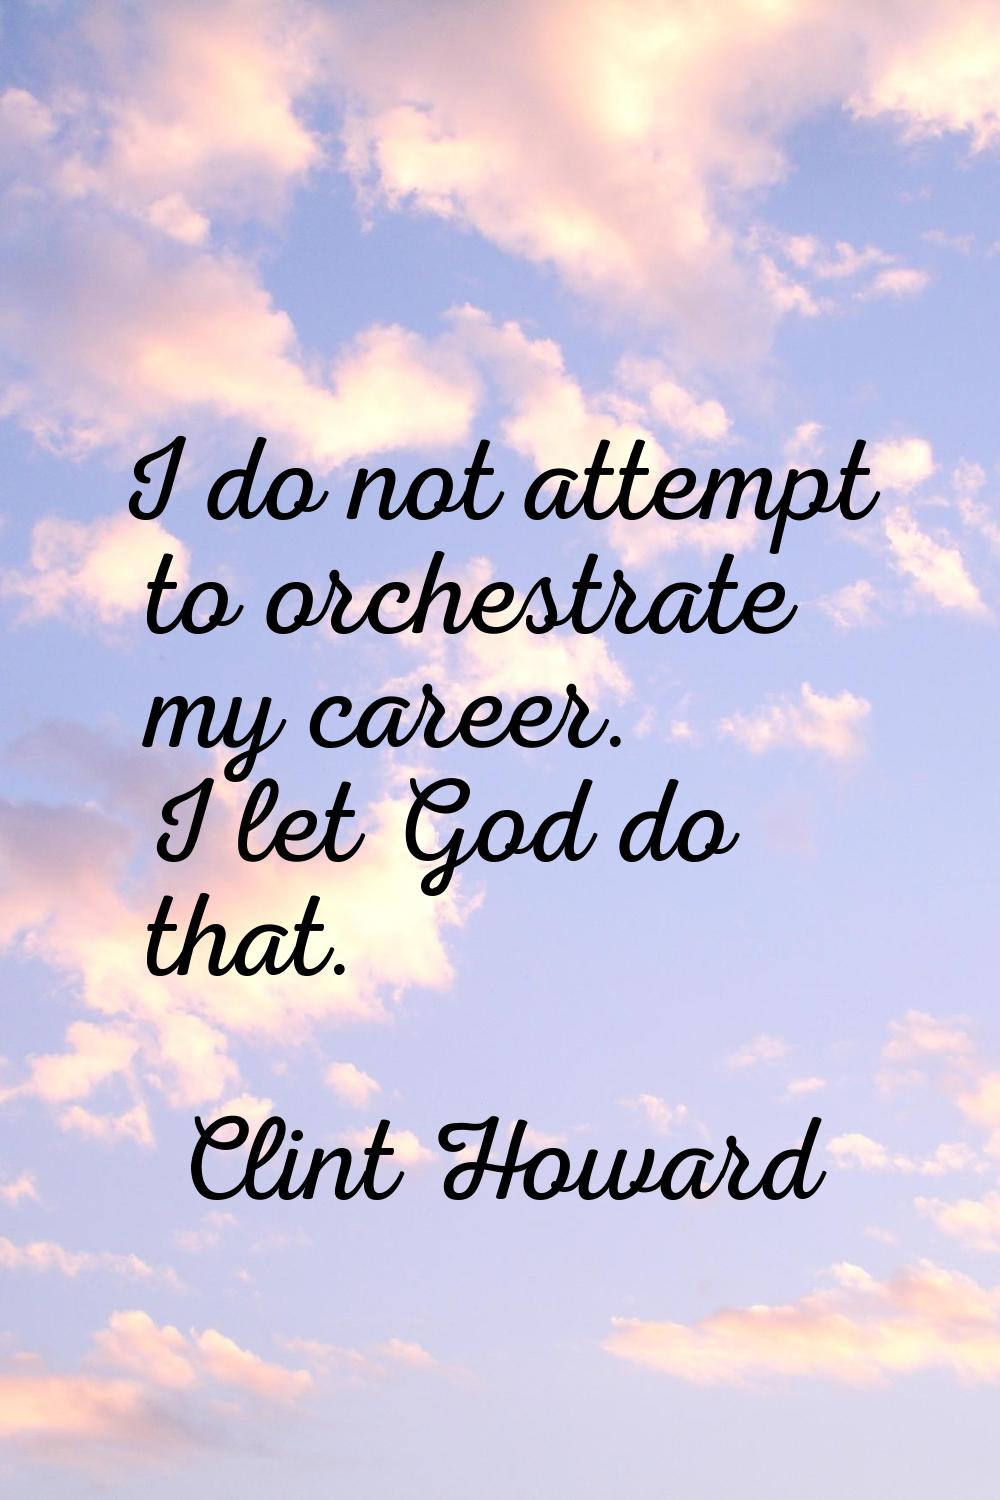 I do not attempt to orchestrate my career. I let God do that.